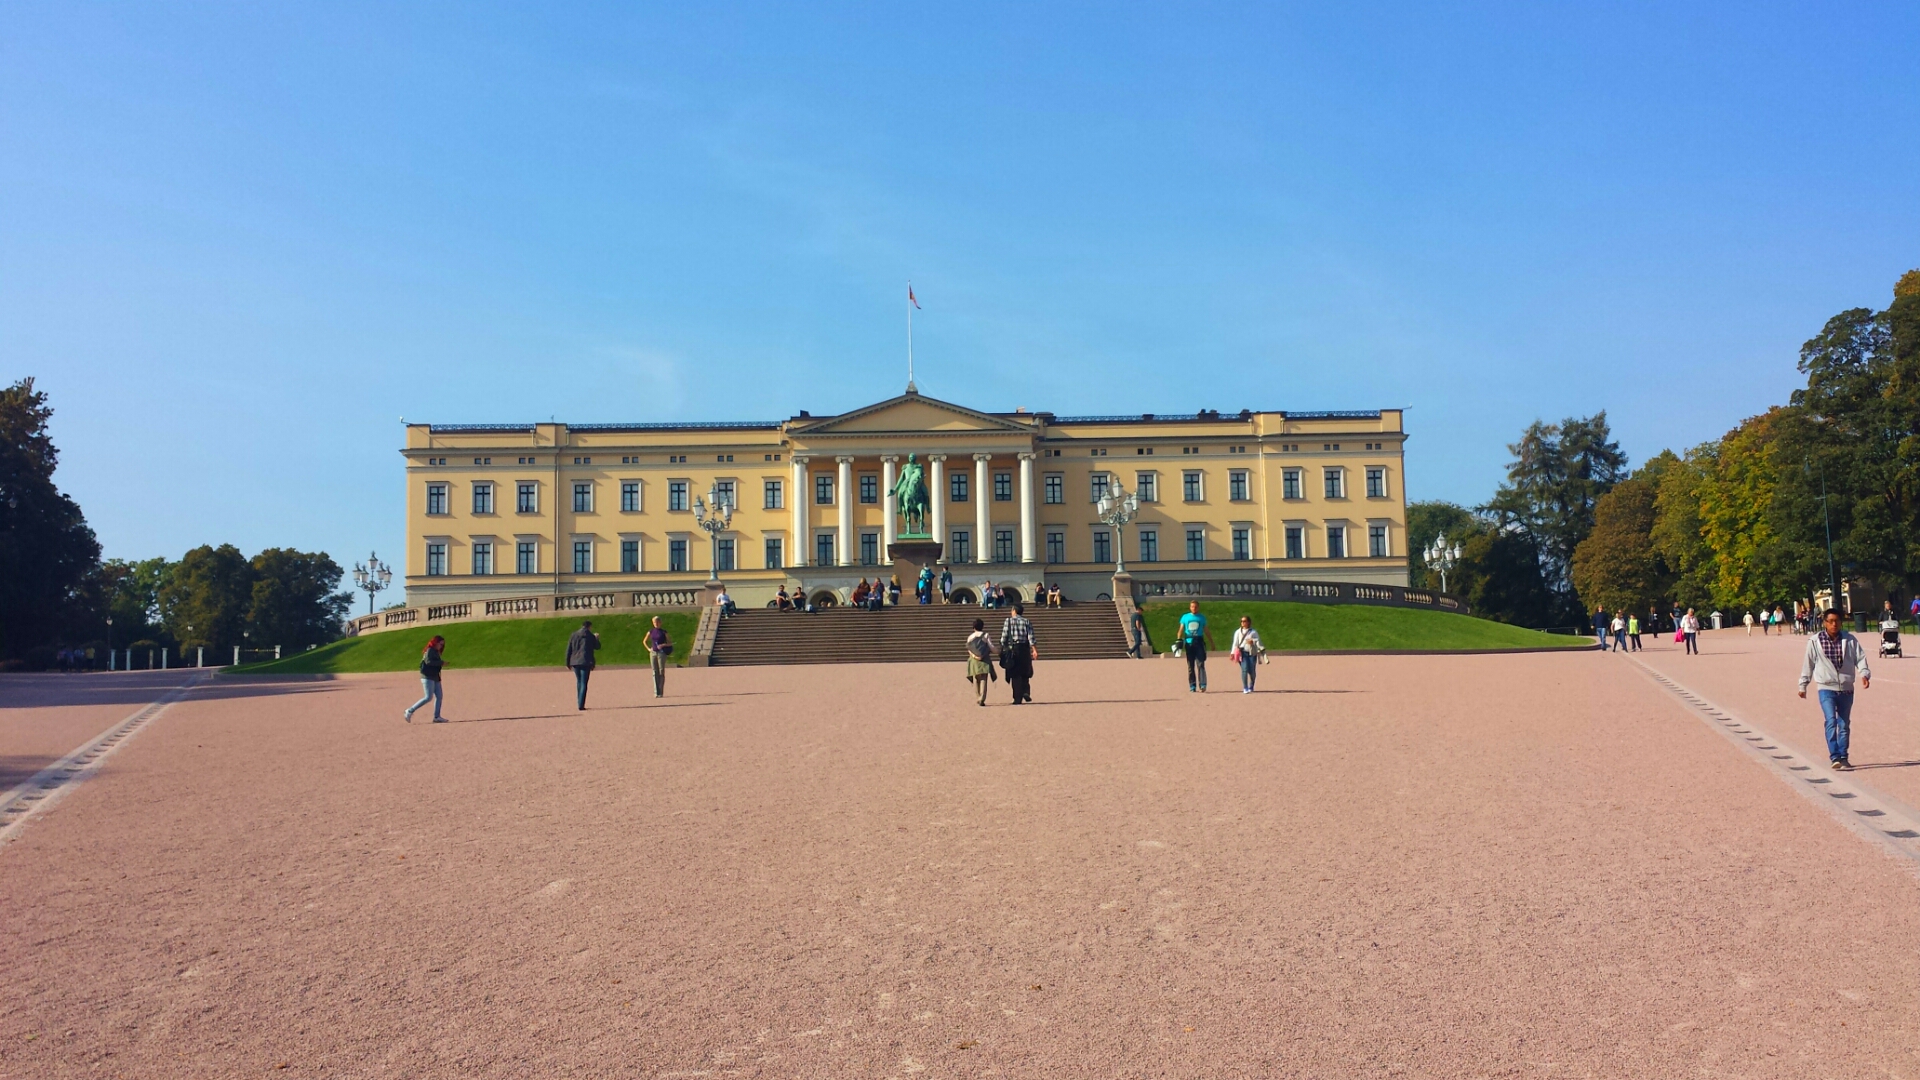 Hello, Oslo! How To Spend A Day Exploring Norway's Hip Capital City